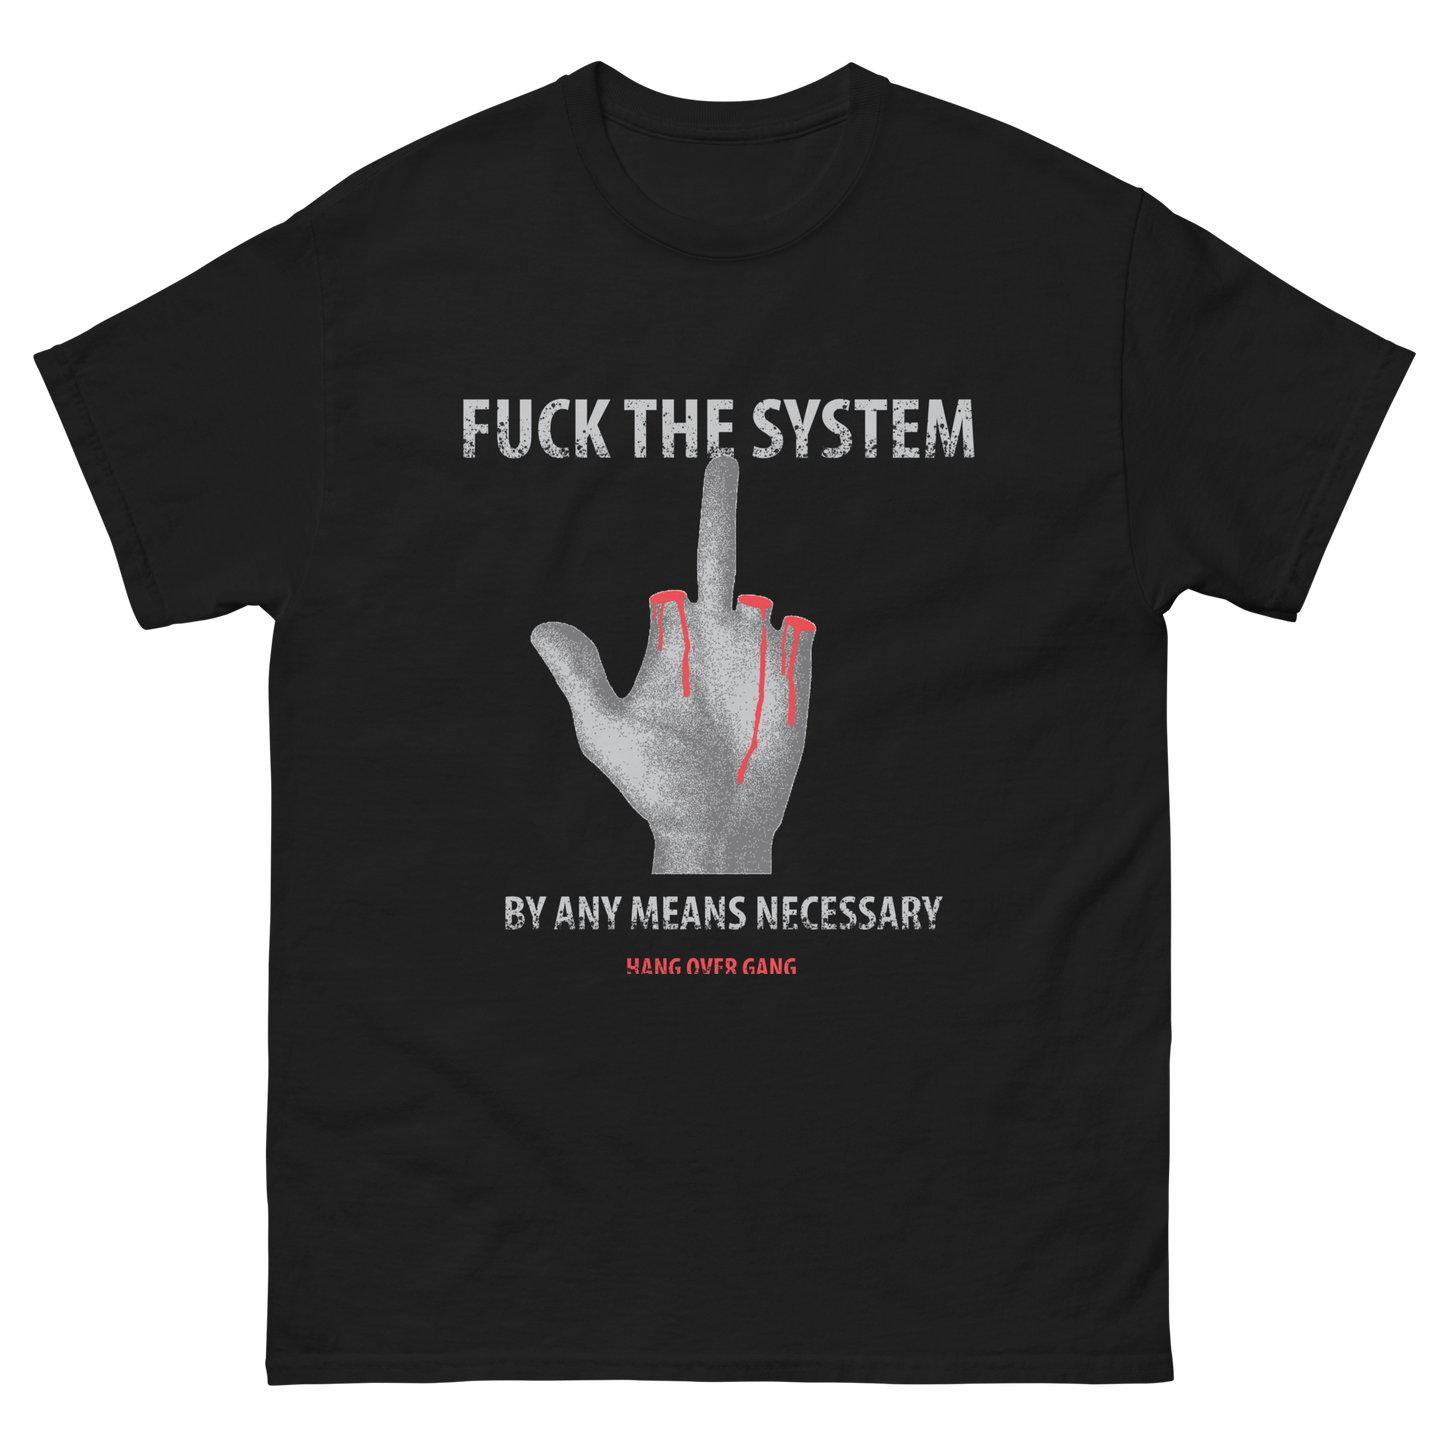 "By Any Means Necessary" T-Shirt